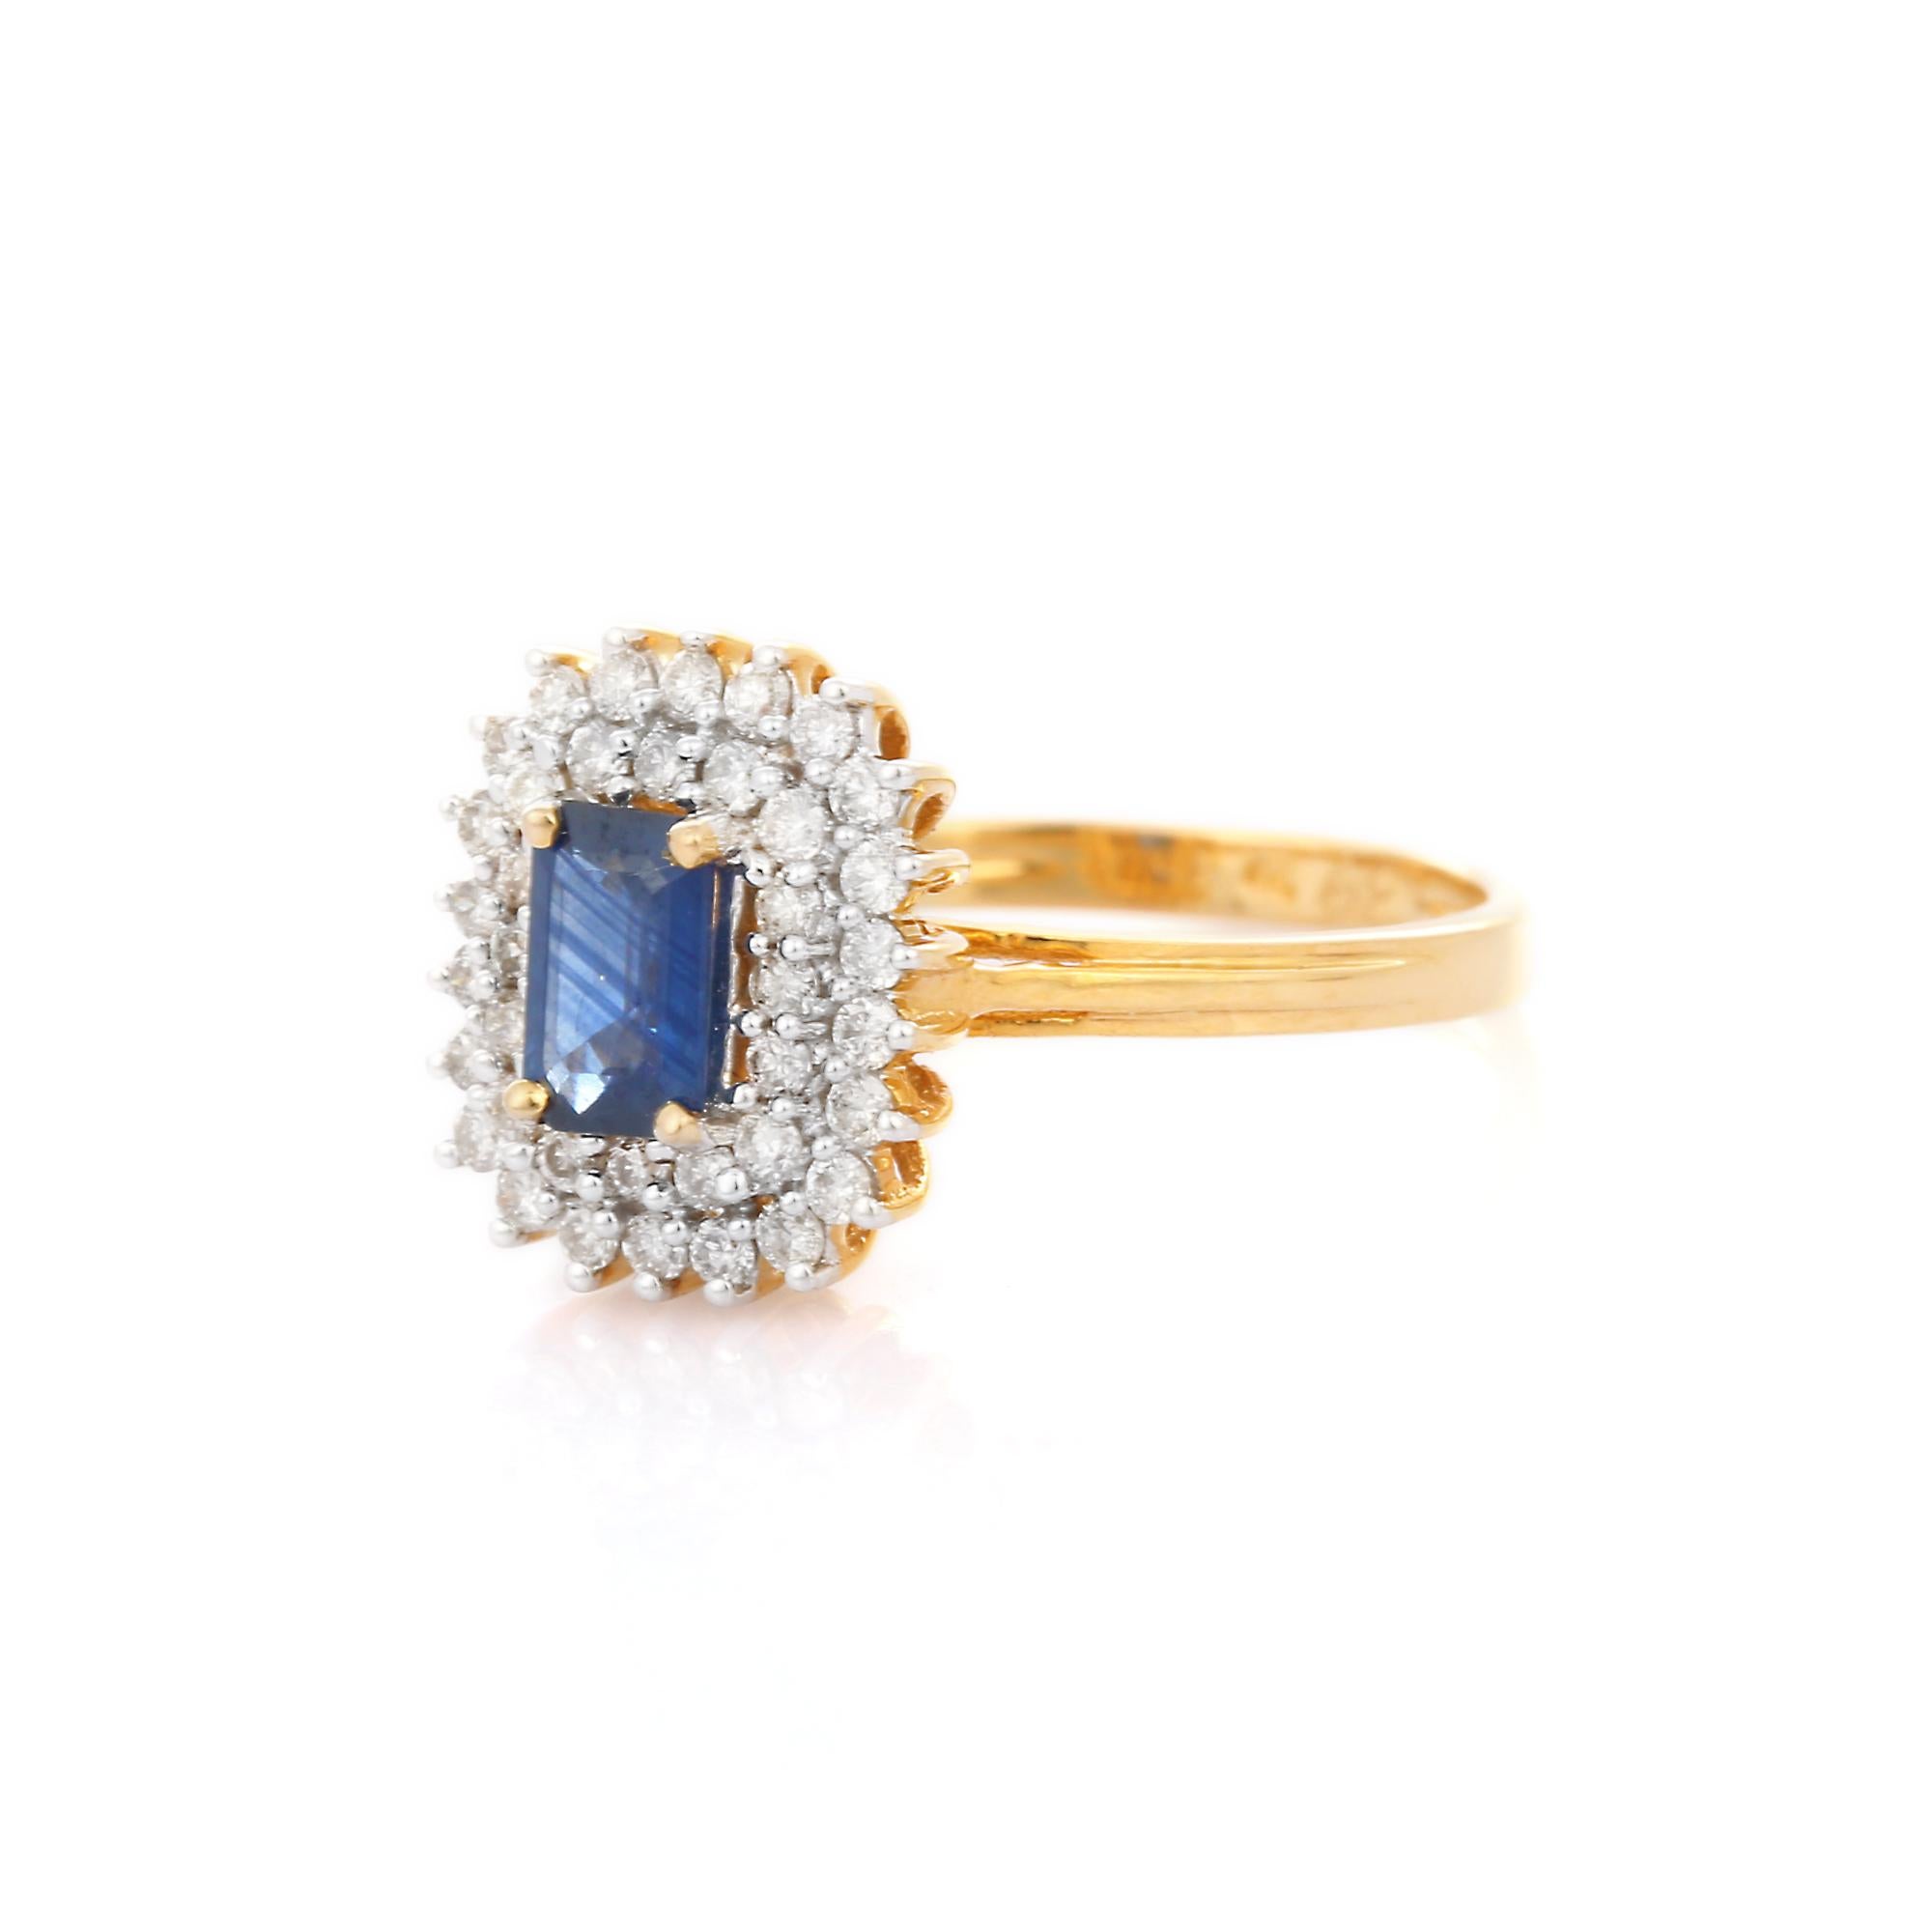 For Sale:  Regal Blue Sapphire Diamond Halo Wedding Ring in 18K Solid Yellow Gold 4